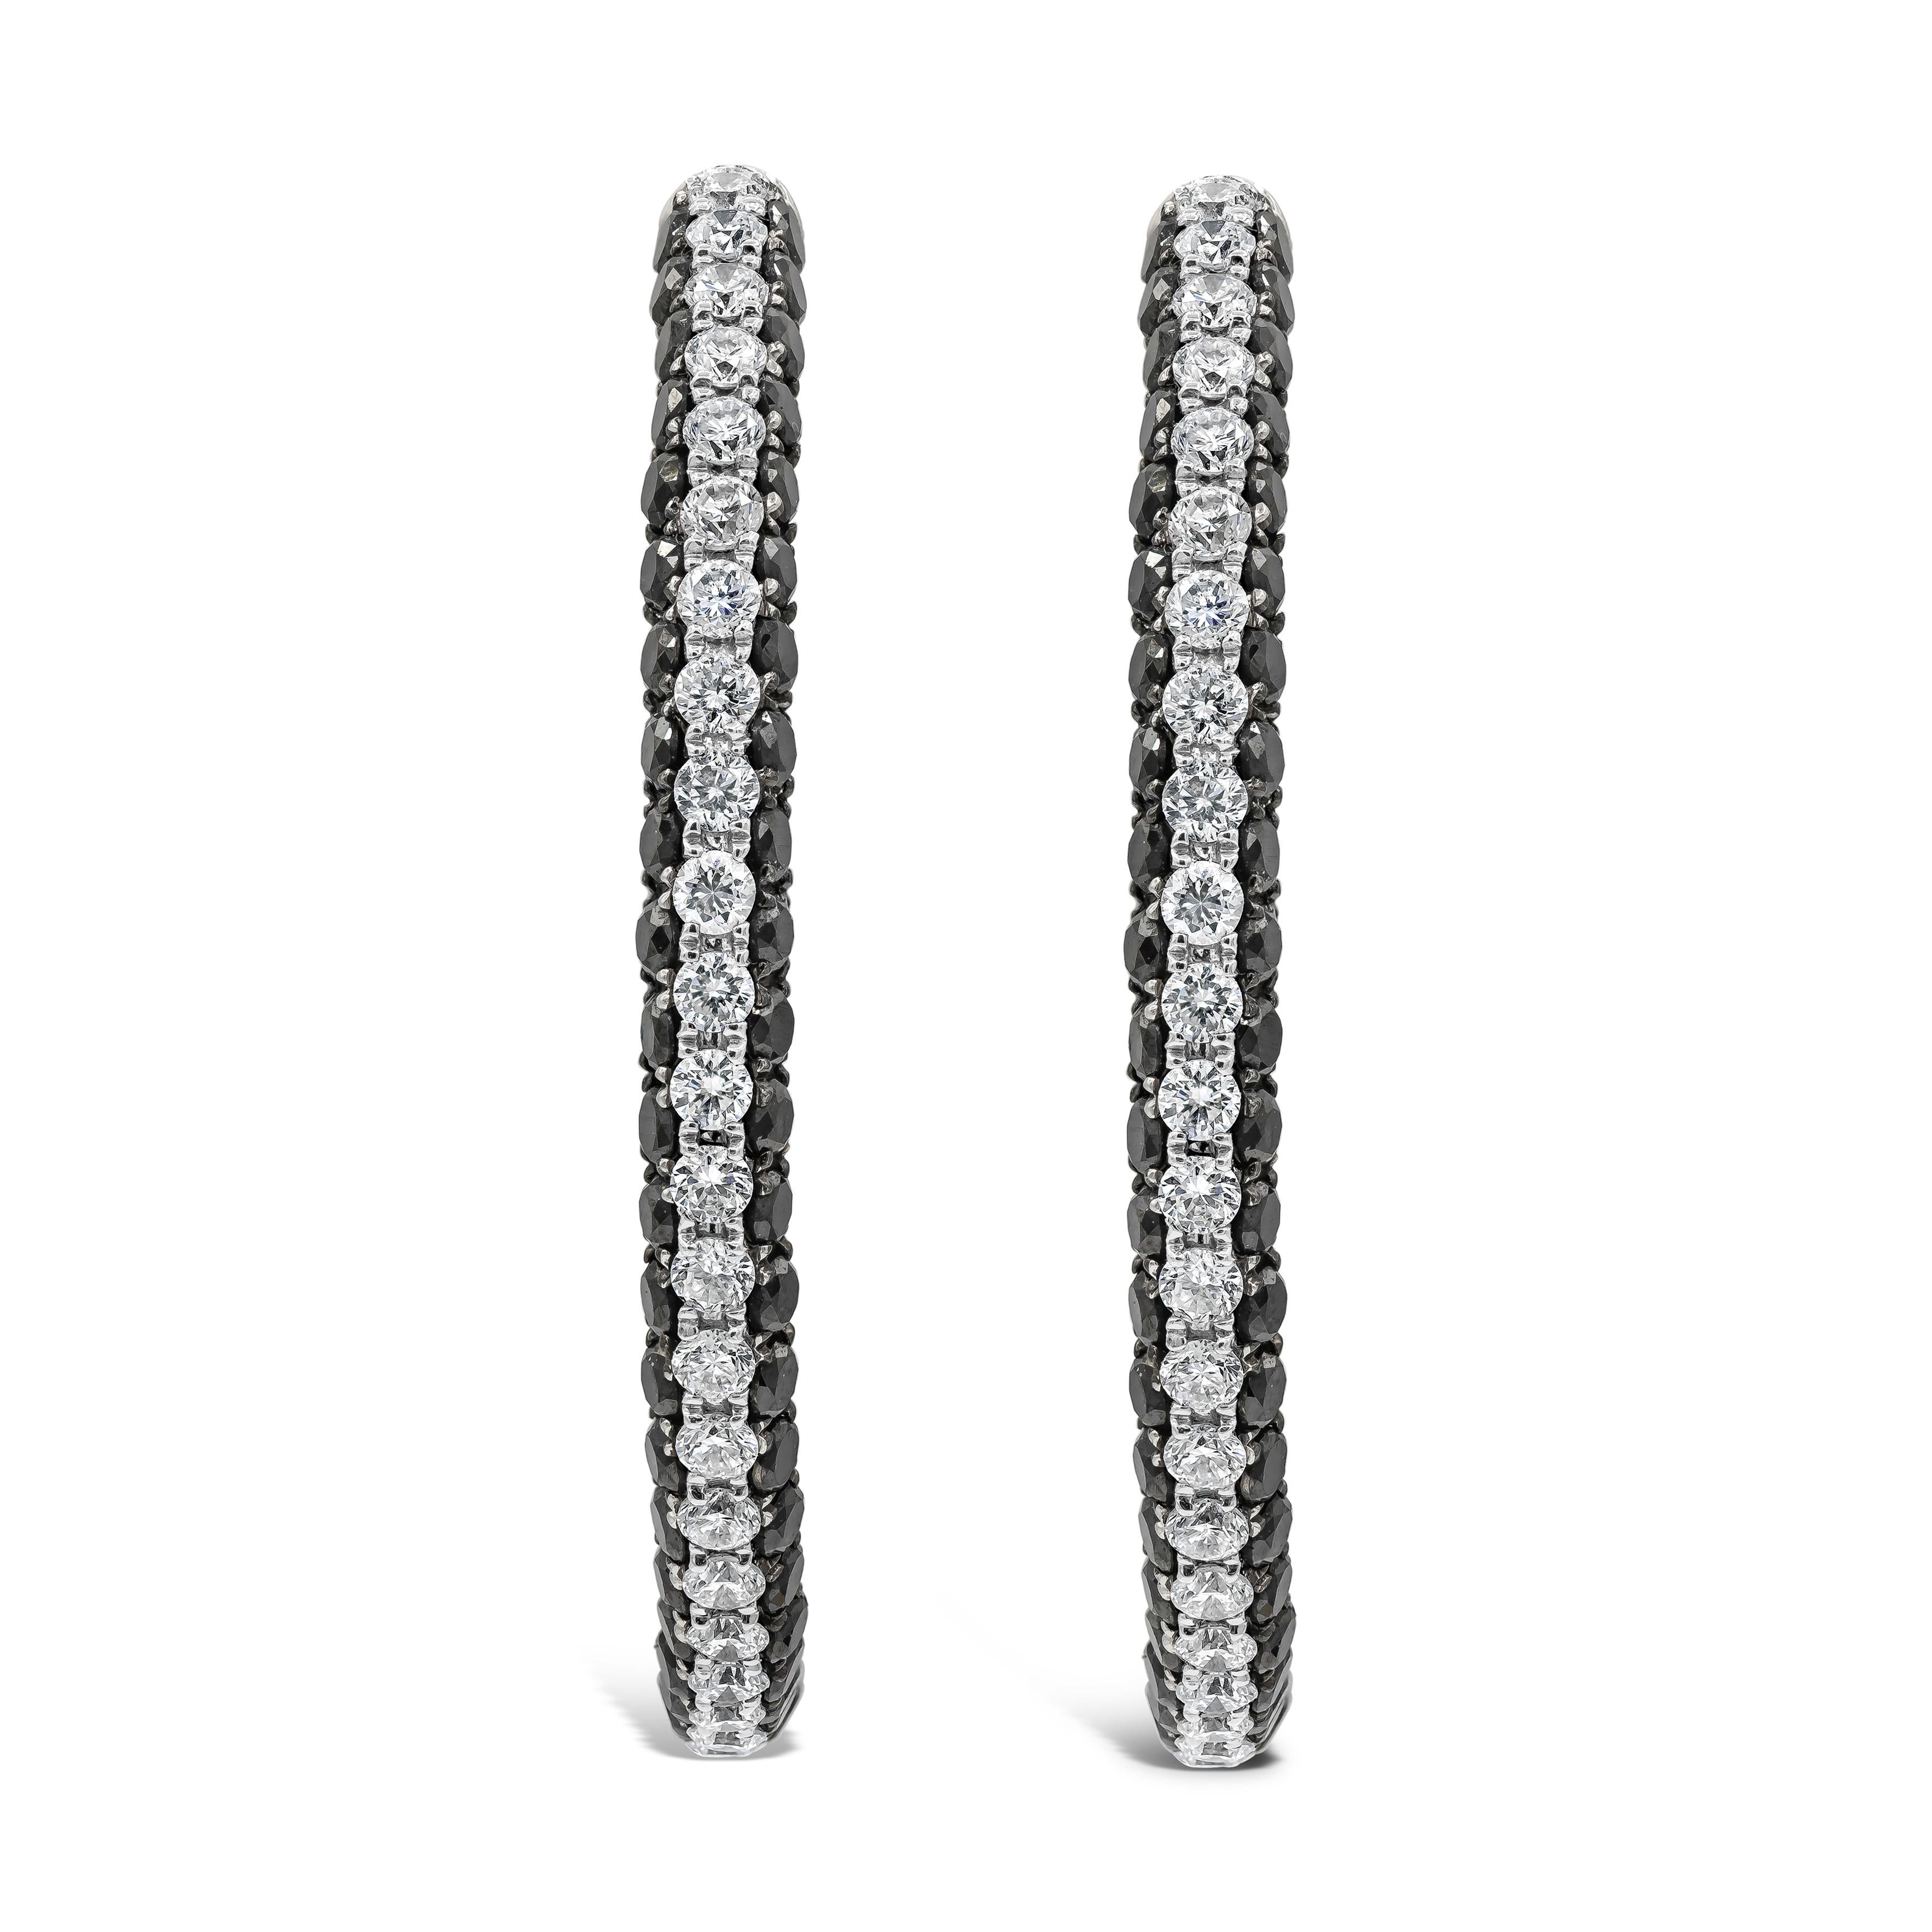 A unique and chic pair of hoop earrings showcasing A row of round brilliant white diamonds set in-between black diamonds in a micro-pave setting. Black diamonds weigh 2.60 carats total and white diamonds weigh 1.30 carats total. Made with 18K White